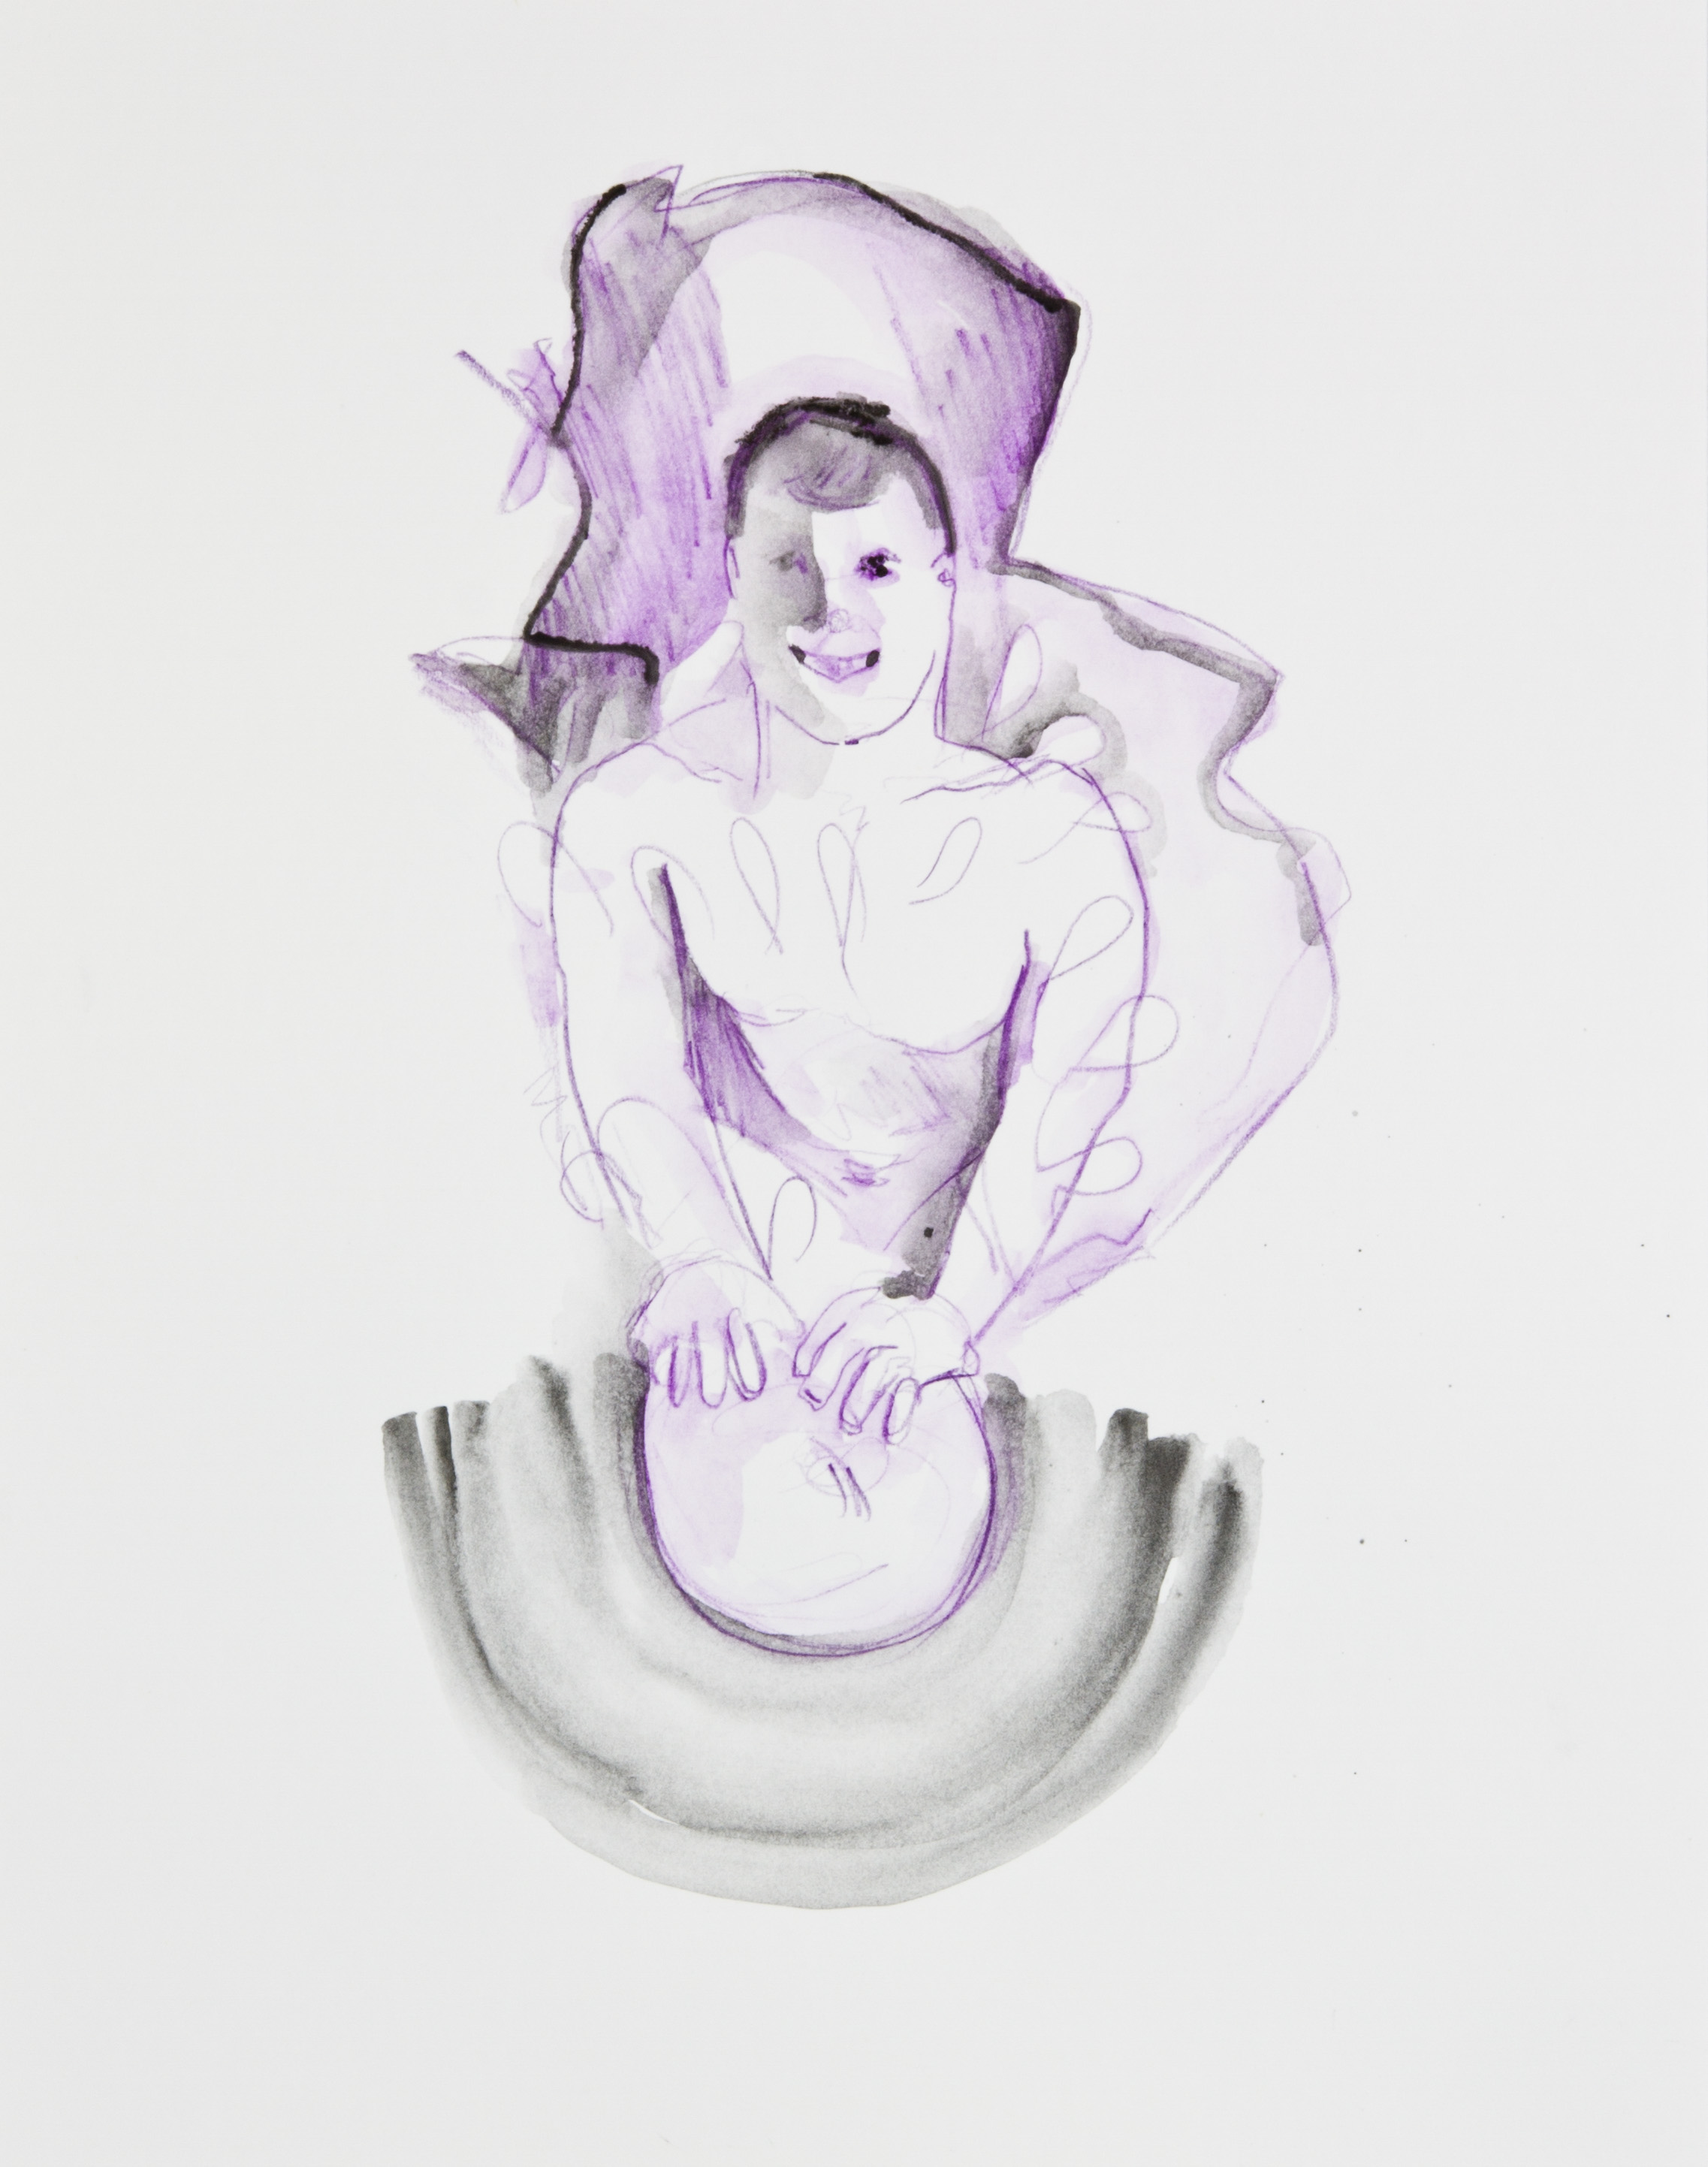 Antiperspirant, 2013, graphite, crayon and watercolor pencil on paper, 11x14 inches